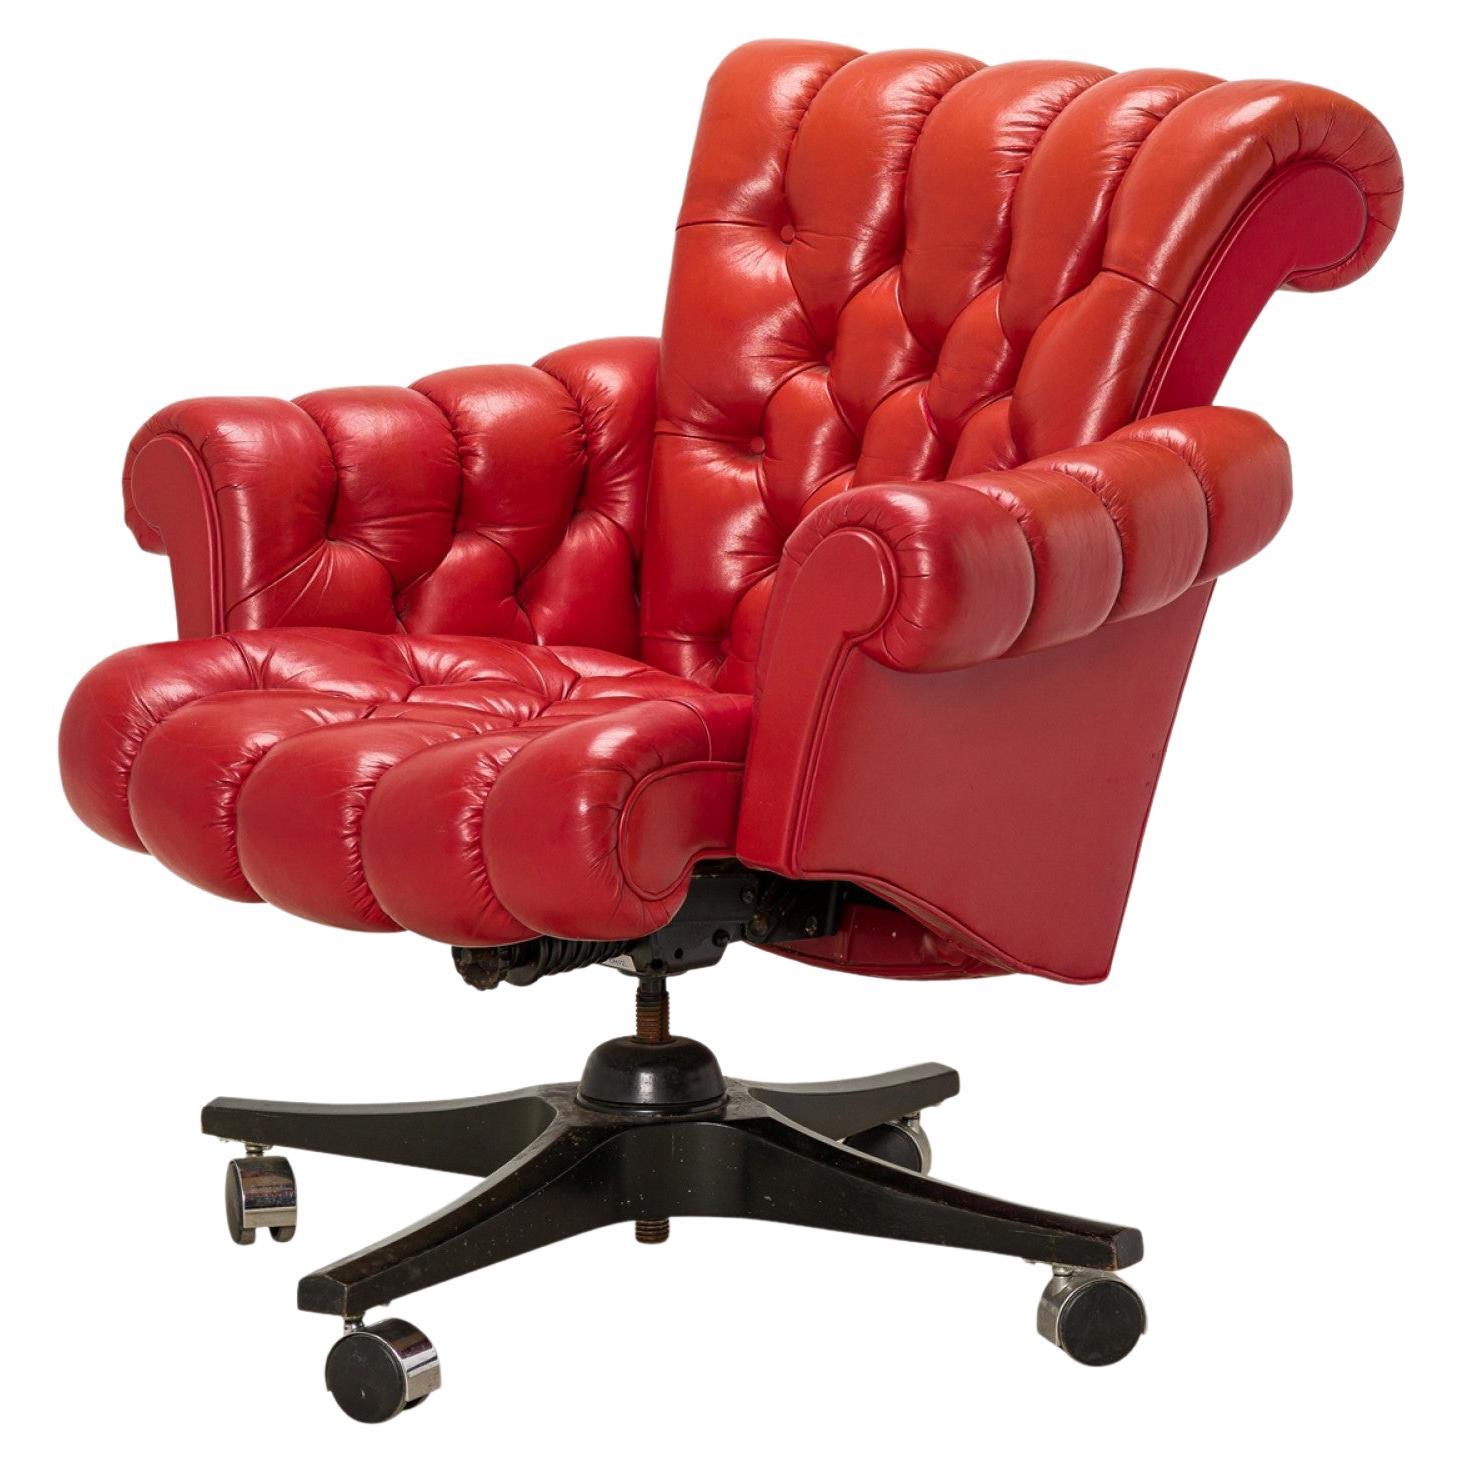 Edward J Wormley for Dunbar 'In Clover' Tufted Red Leather Rolling Office Chair